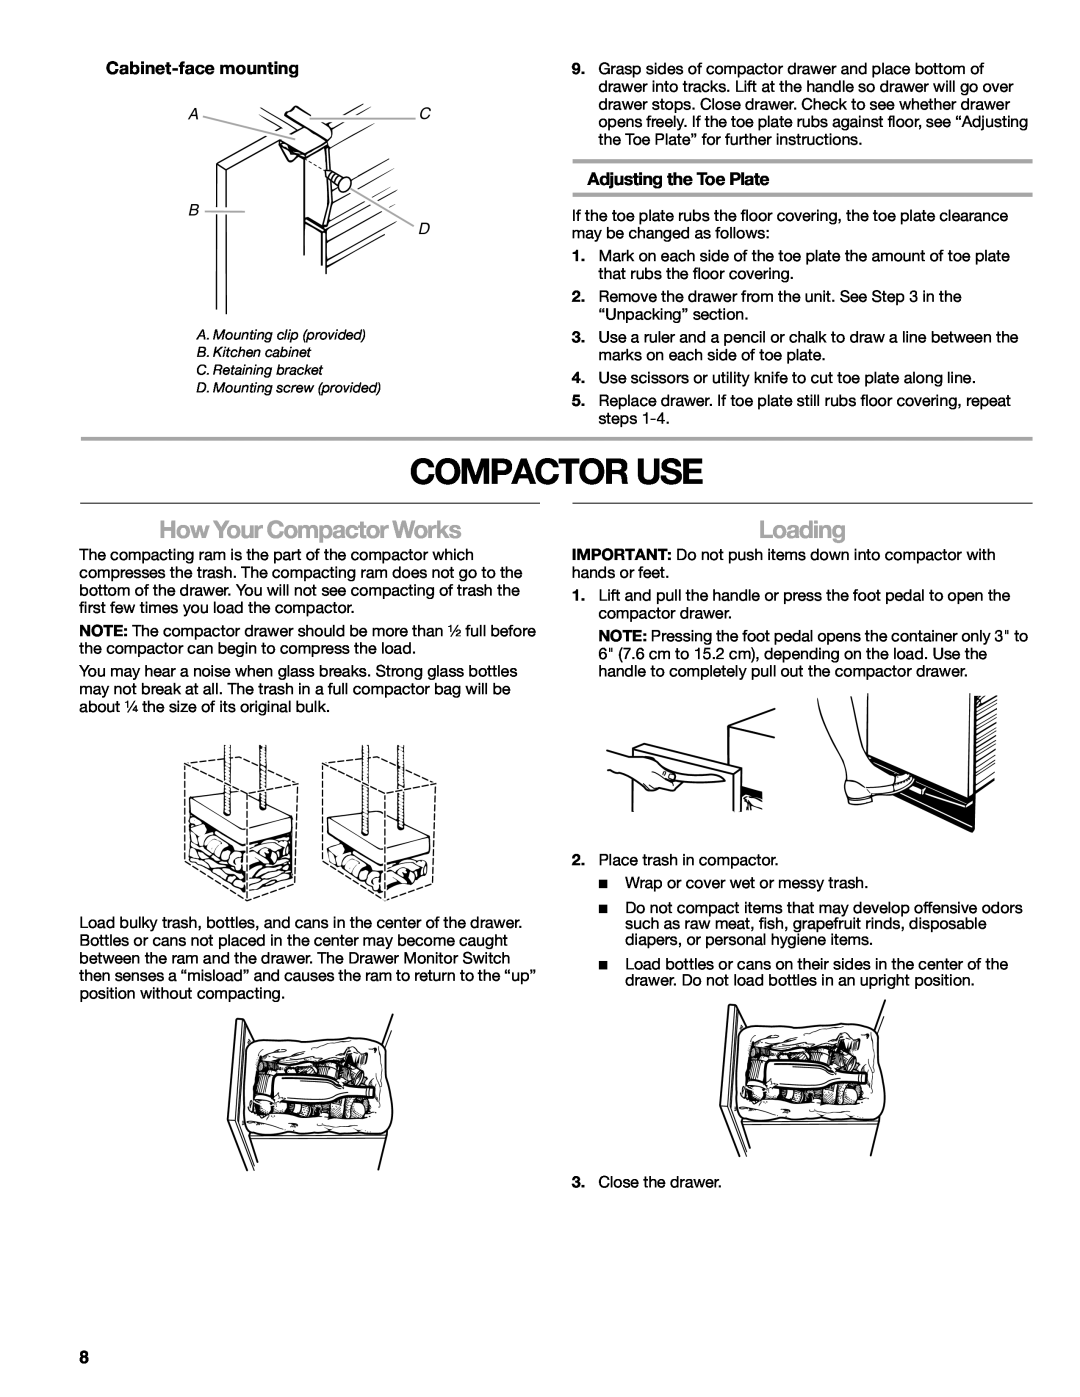 Kenmore 665.1363 manual Compactor Use, How Your Compactor Works, Loading, Cabinet-face mounting, Adjusting the Toe Plate 